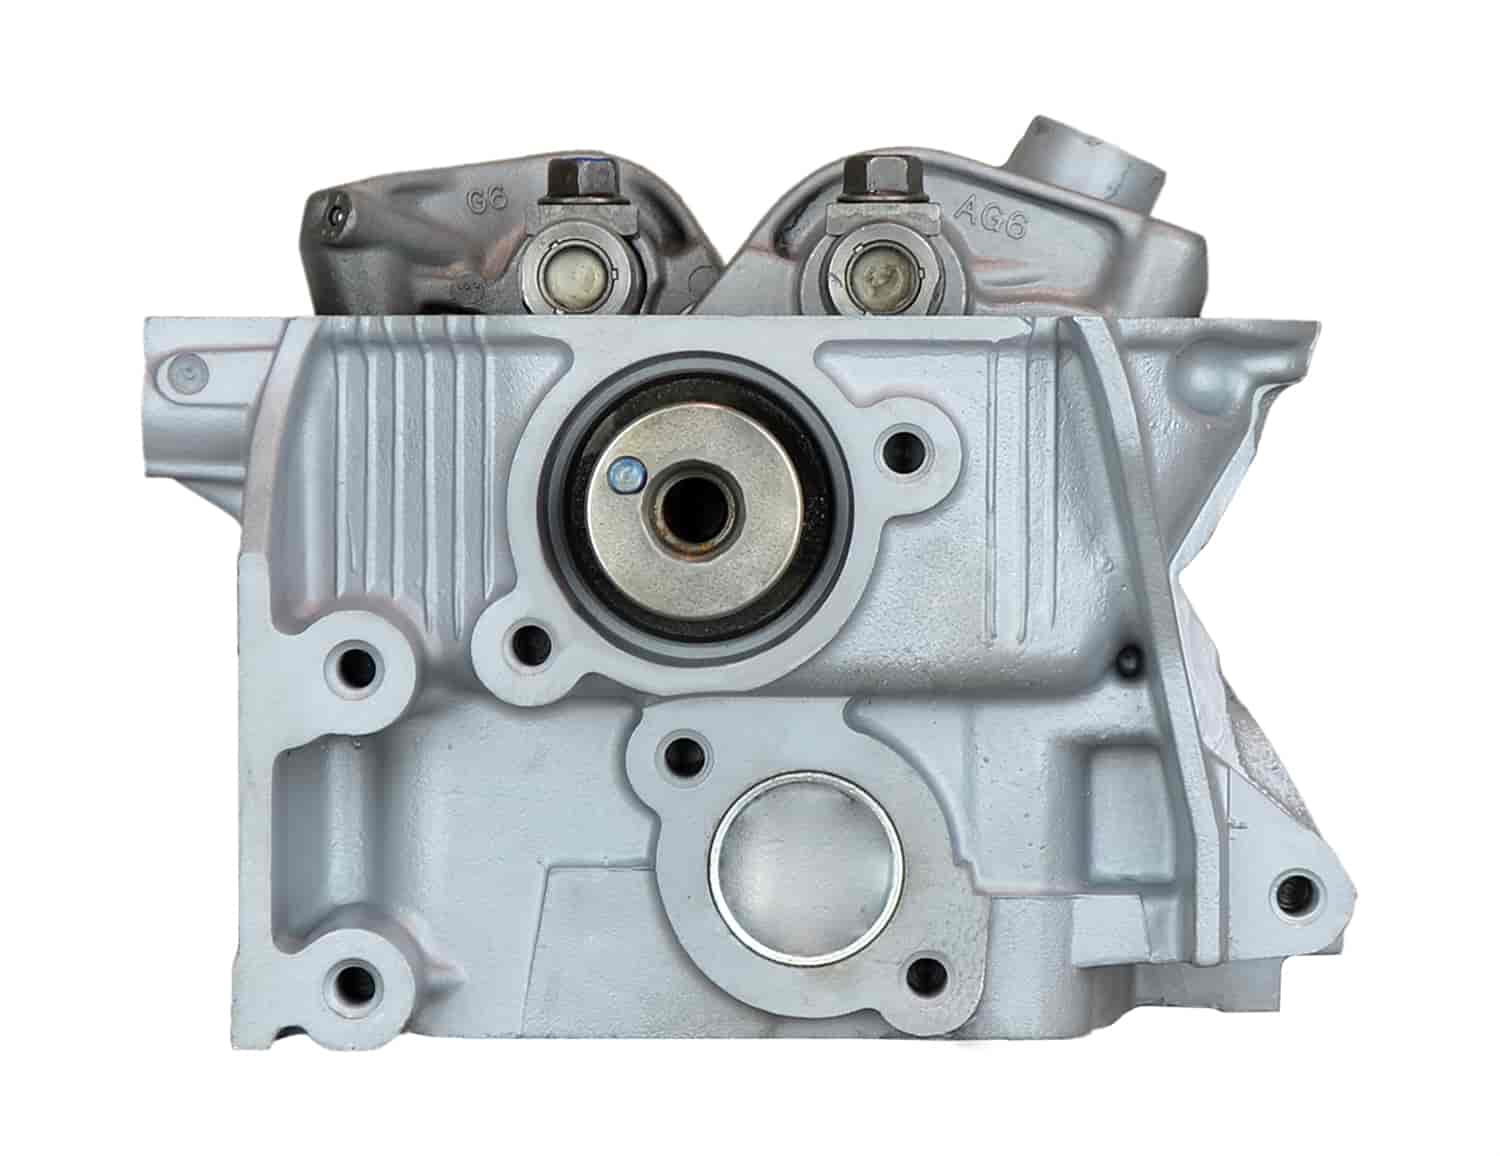 Remanufactured Cylinder Head for 1997-2004 Mitsubishi Montero with 3.5L V6 6G74